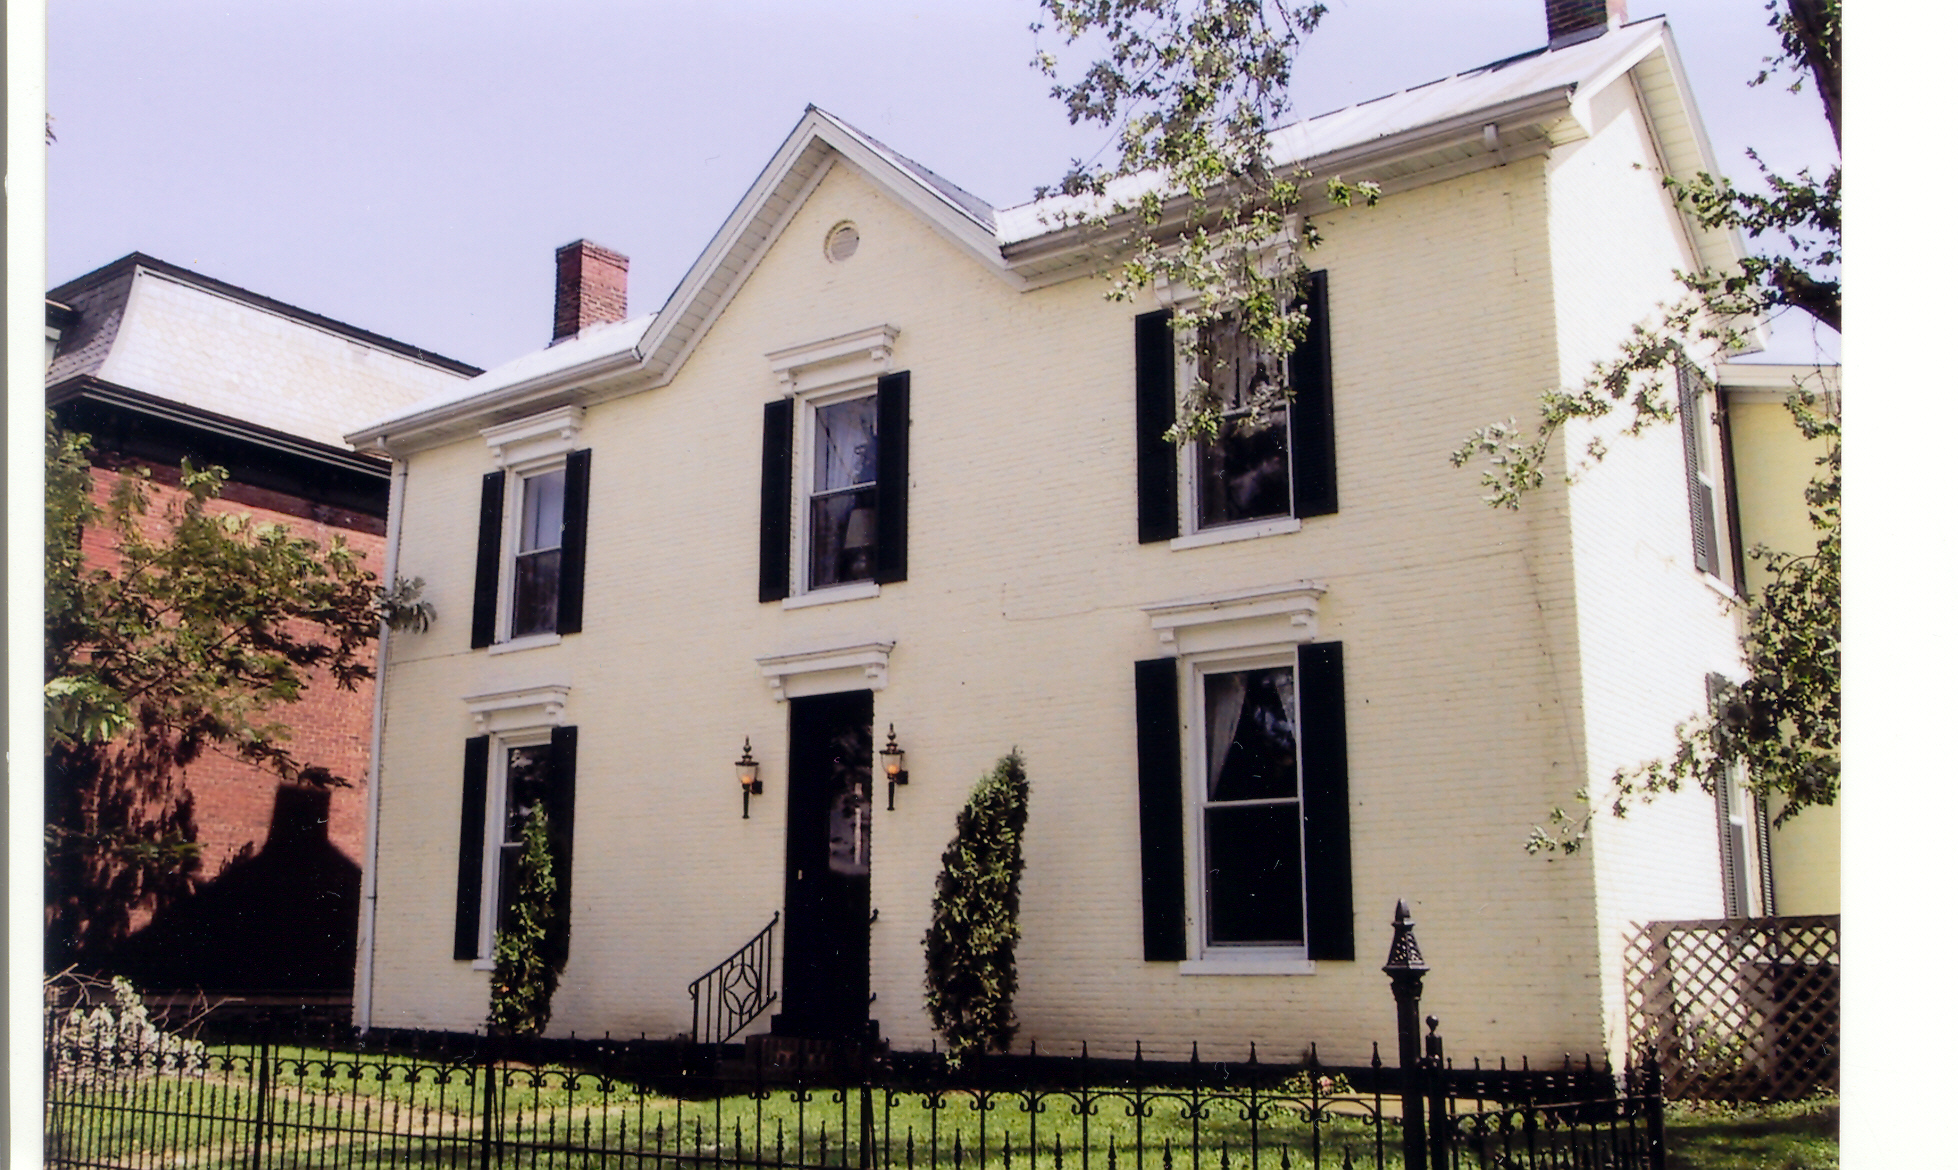 Image of a white house with 6 windows, the Rosemary Clooney house.